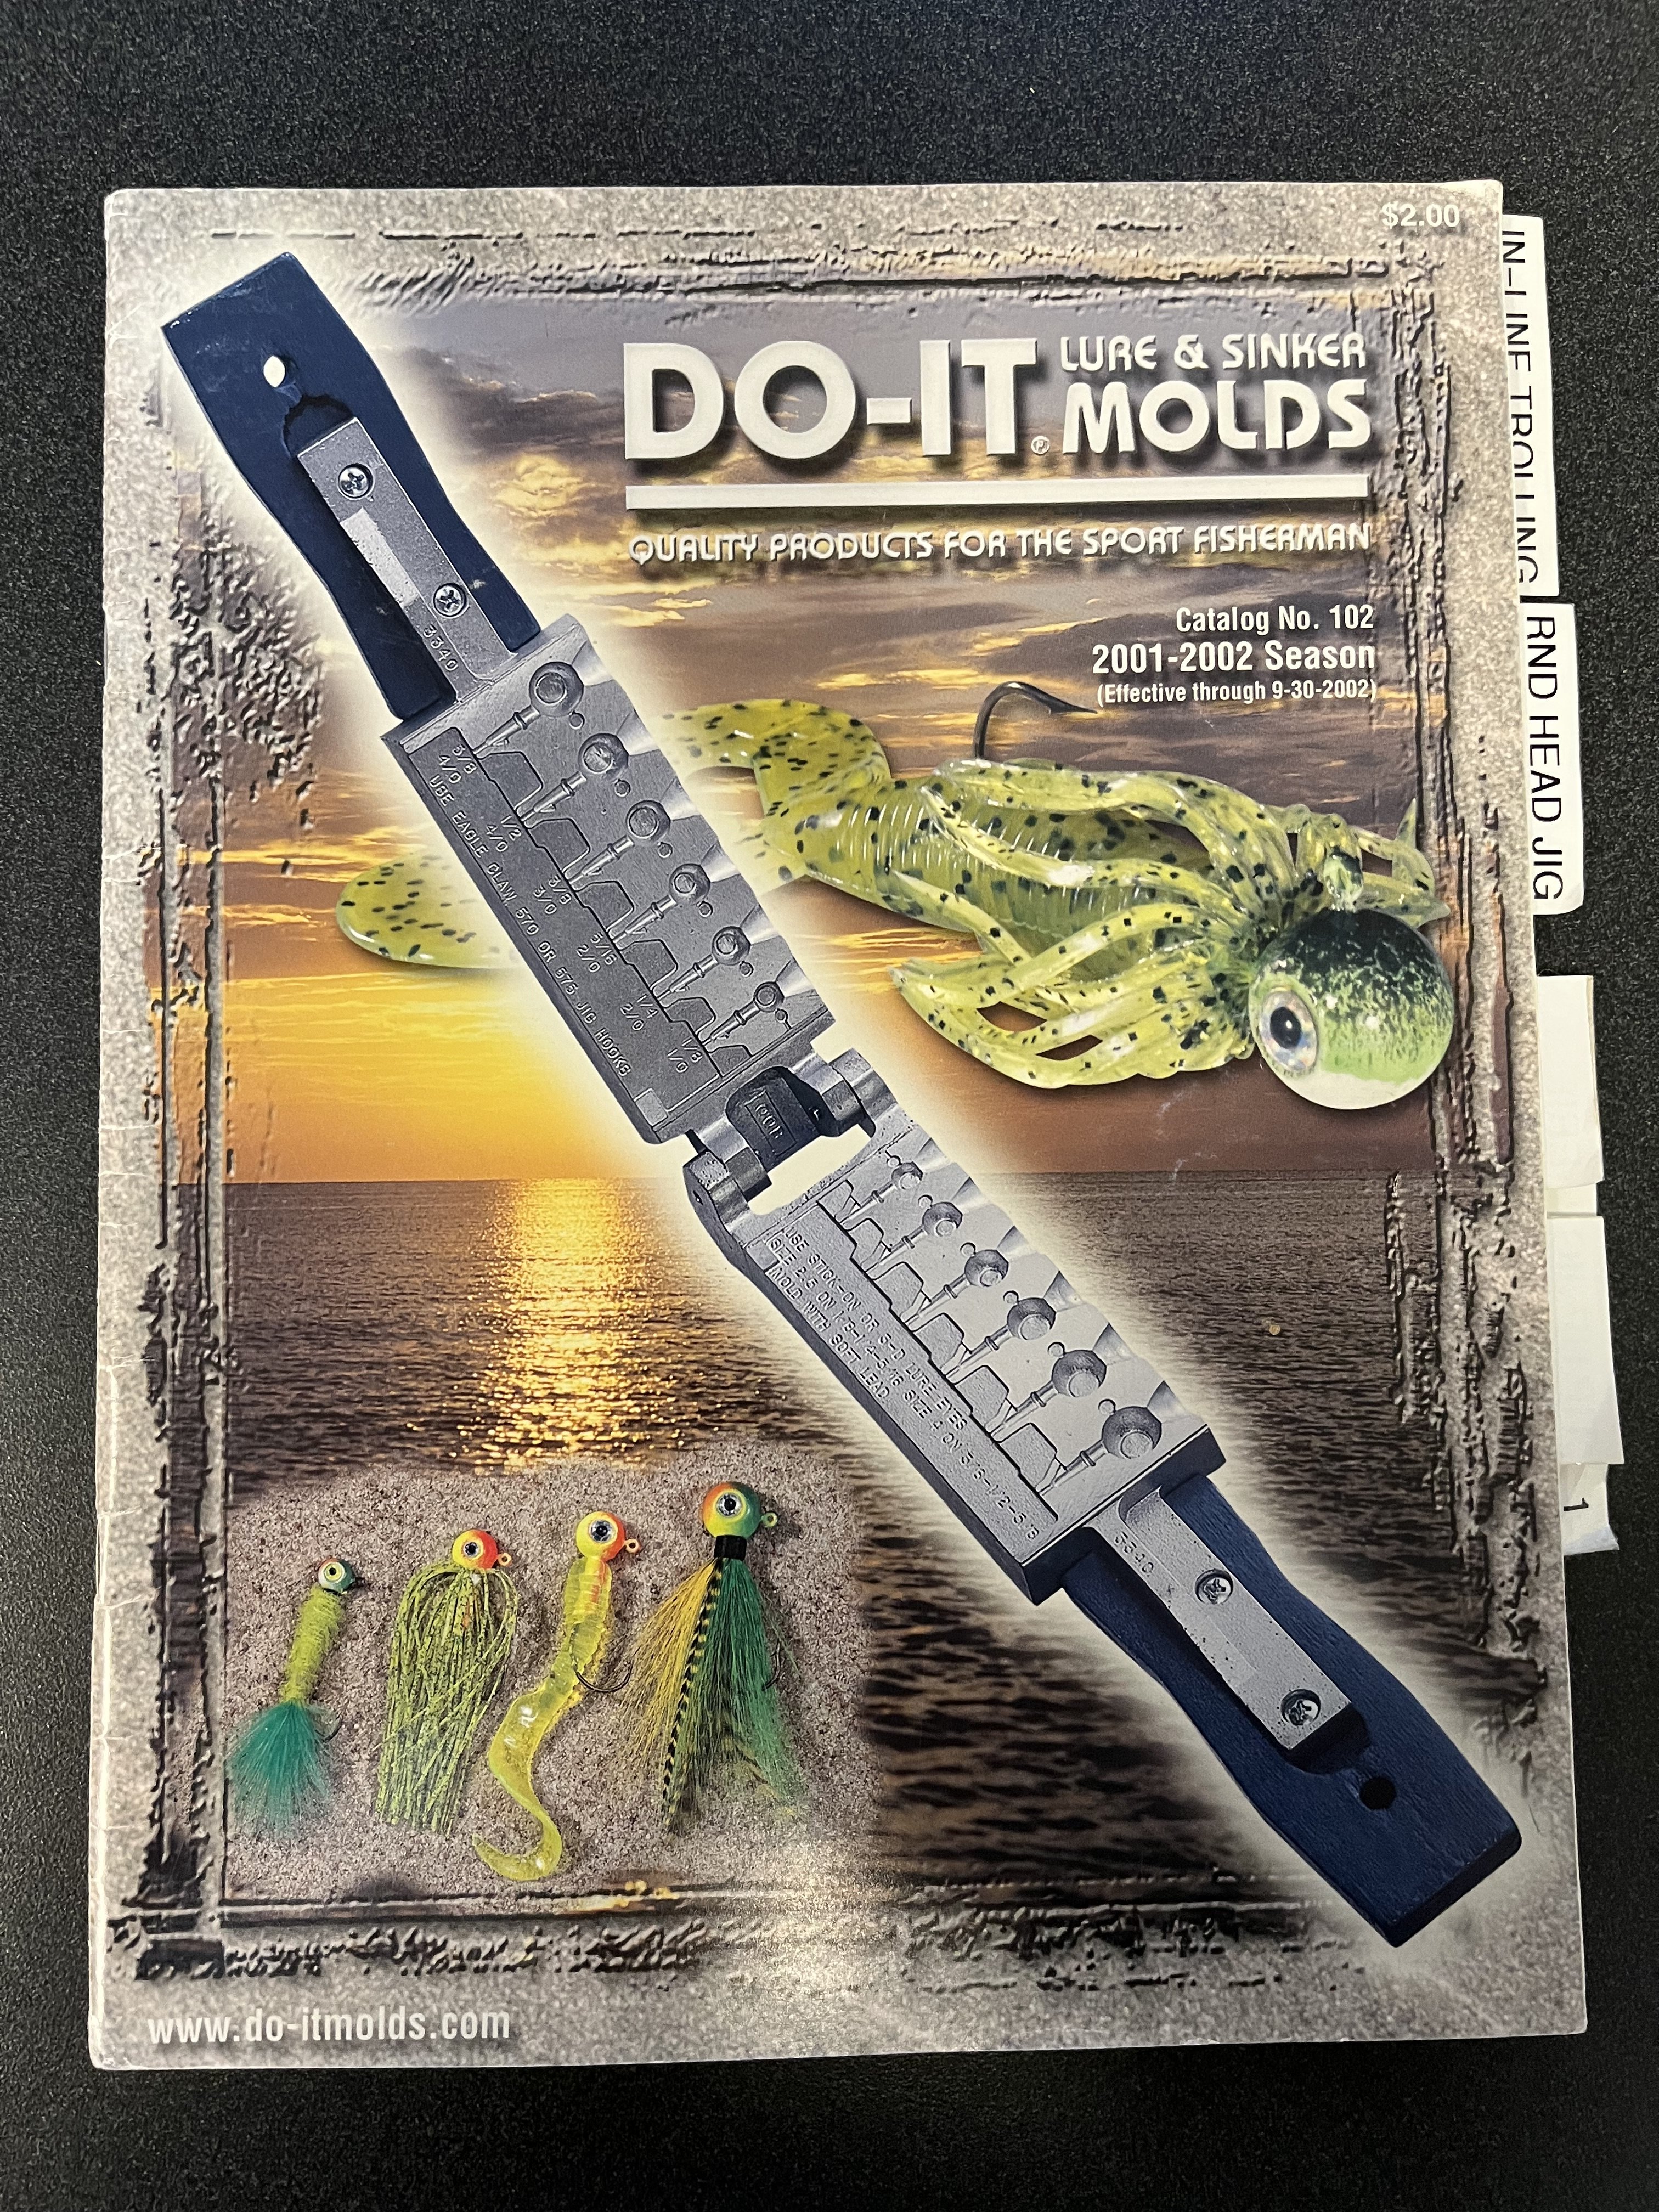 Hey old timers- help me out… old school do-it jig molds - Wire Baits -   - Tackle Building Forums